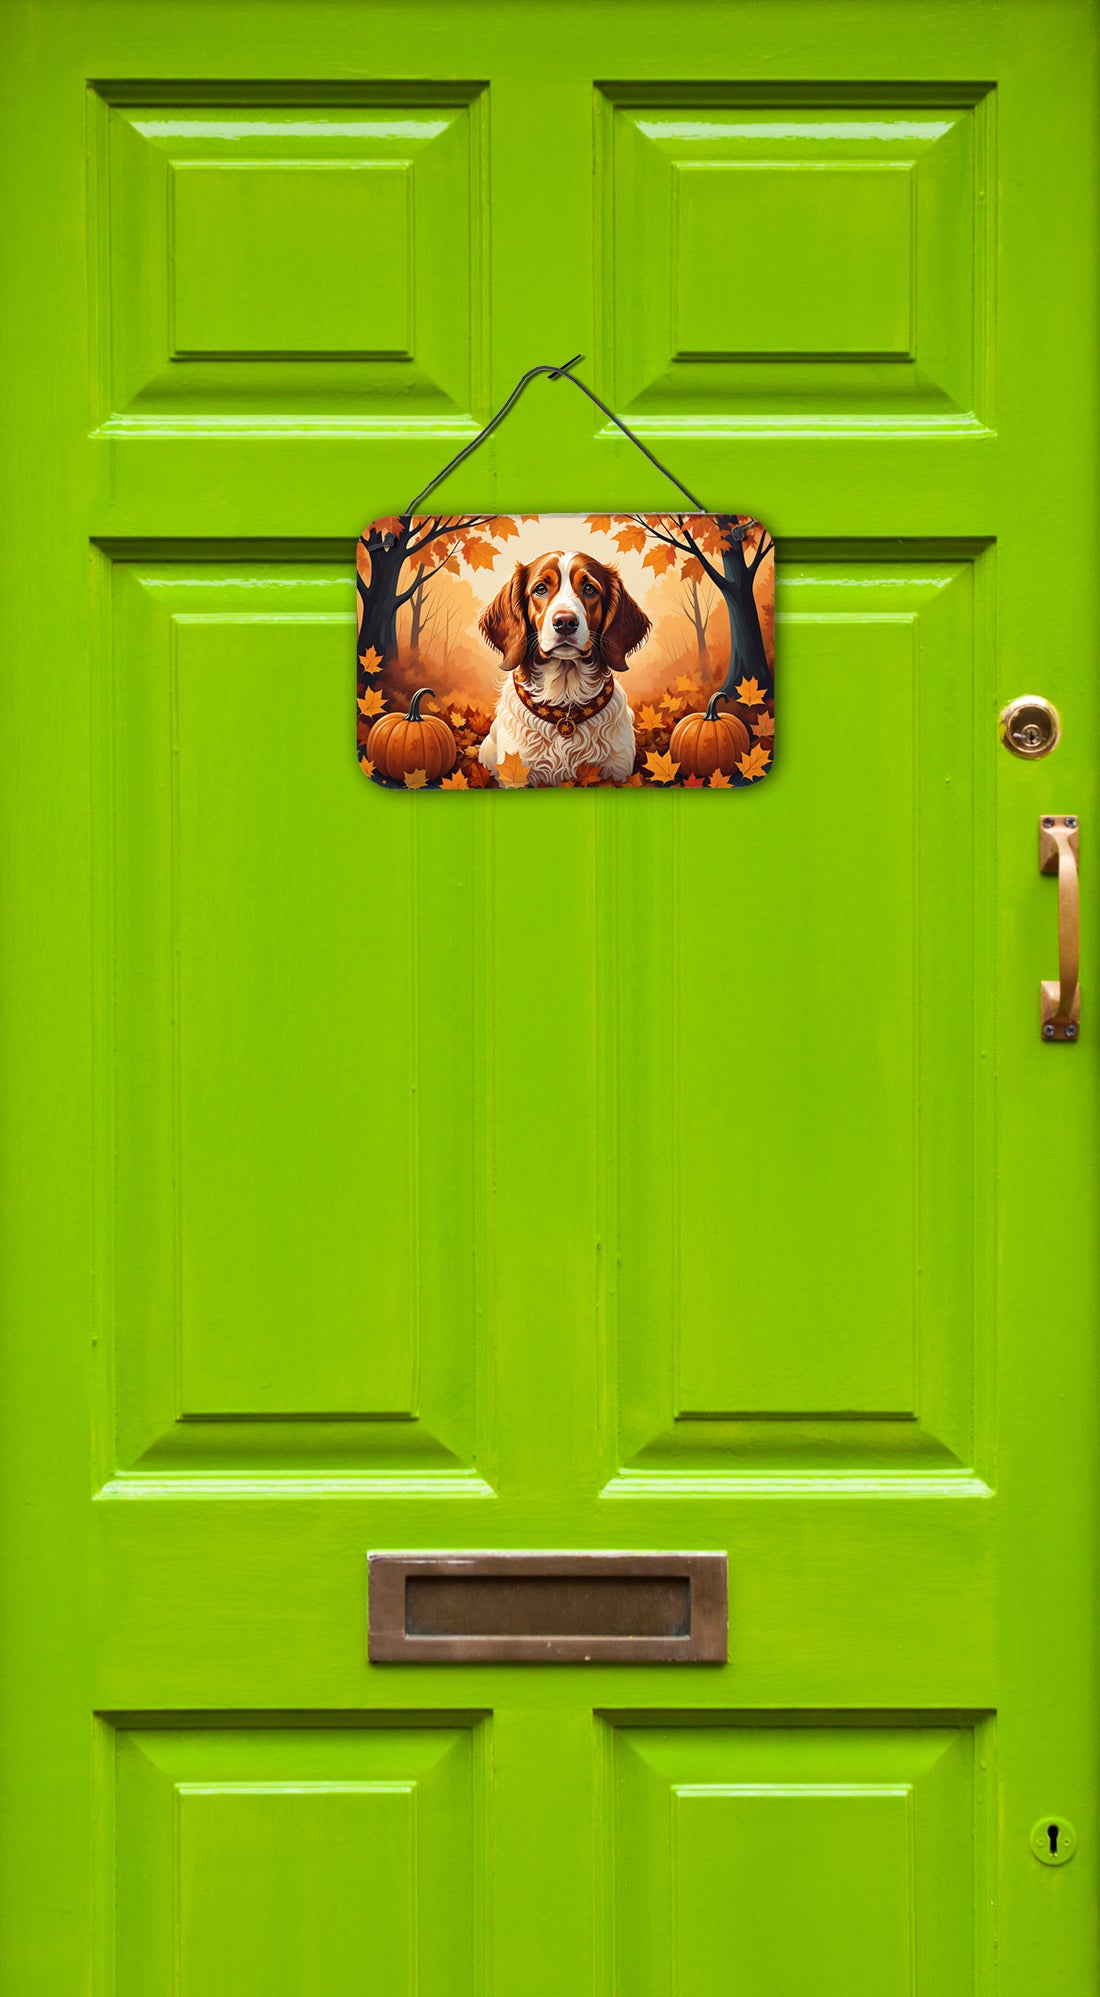 Buy this Brittany Spaniel Fall Wall or Door Hanging Prints